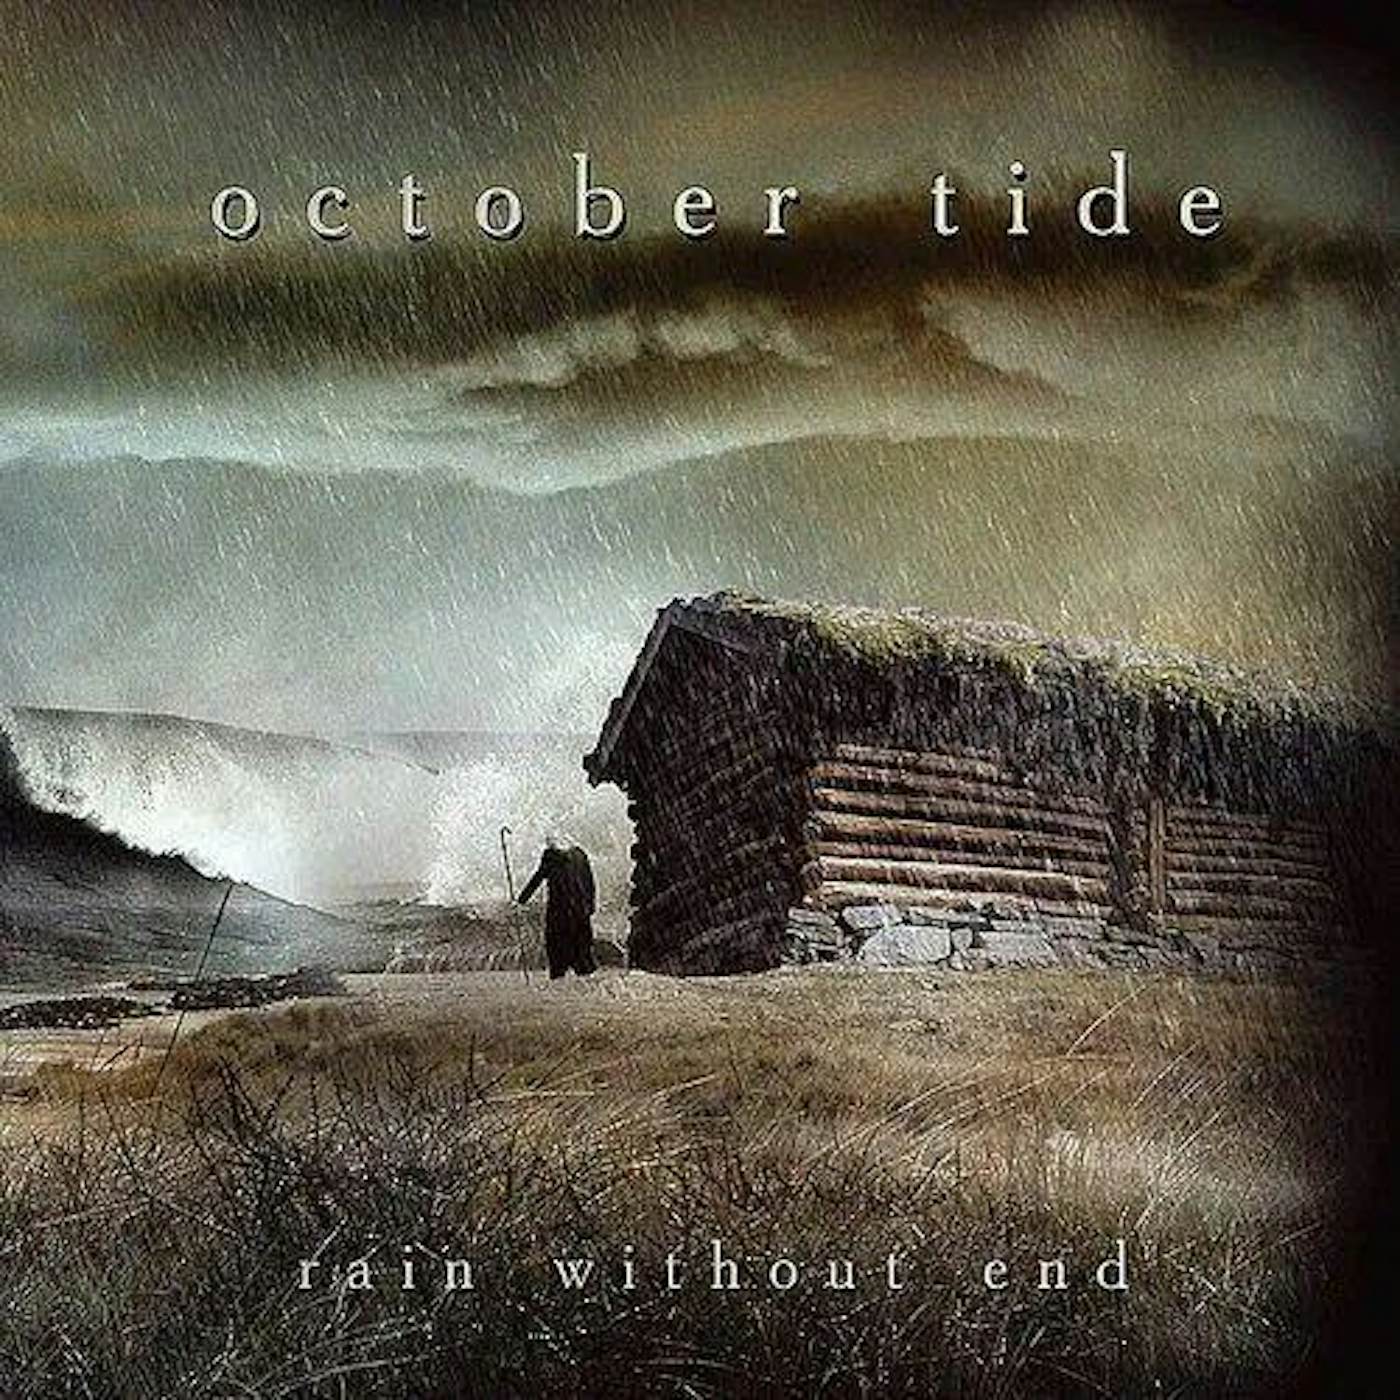 October Tide Rain Without End - Light Blue Vinyl Record